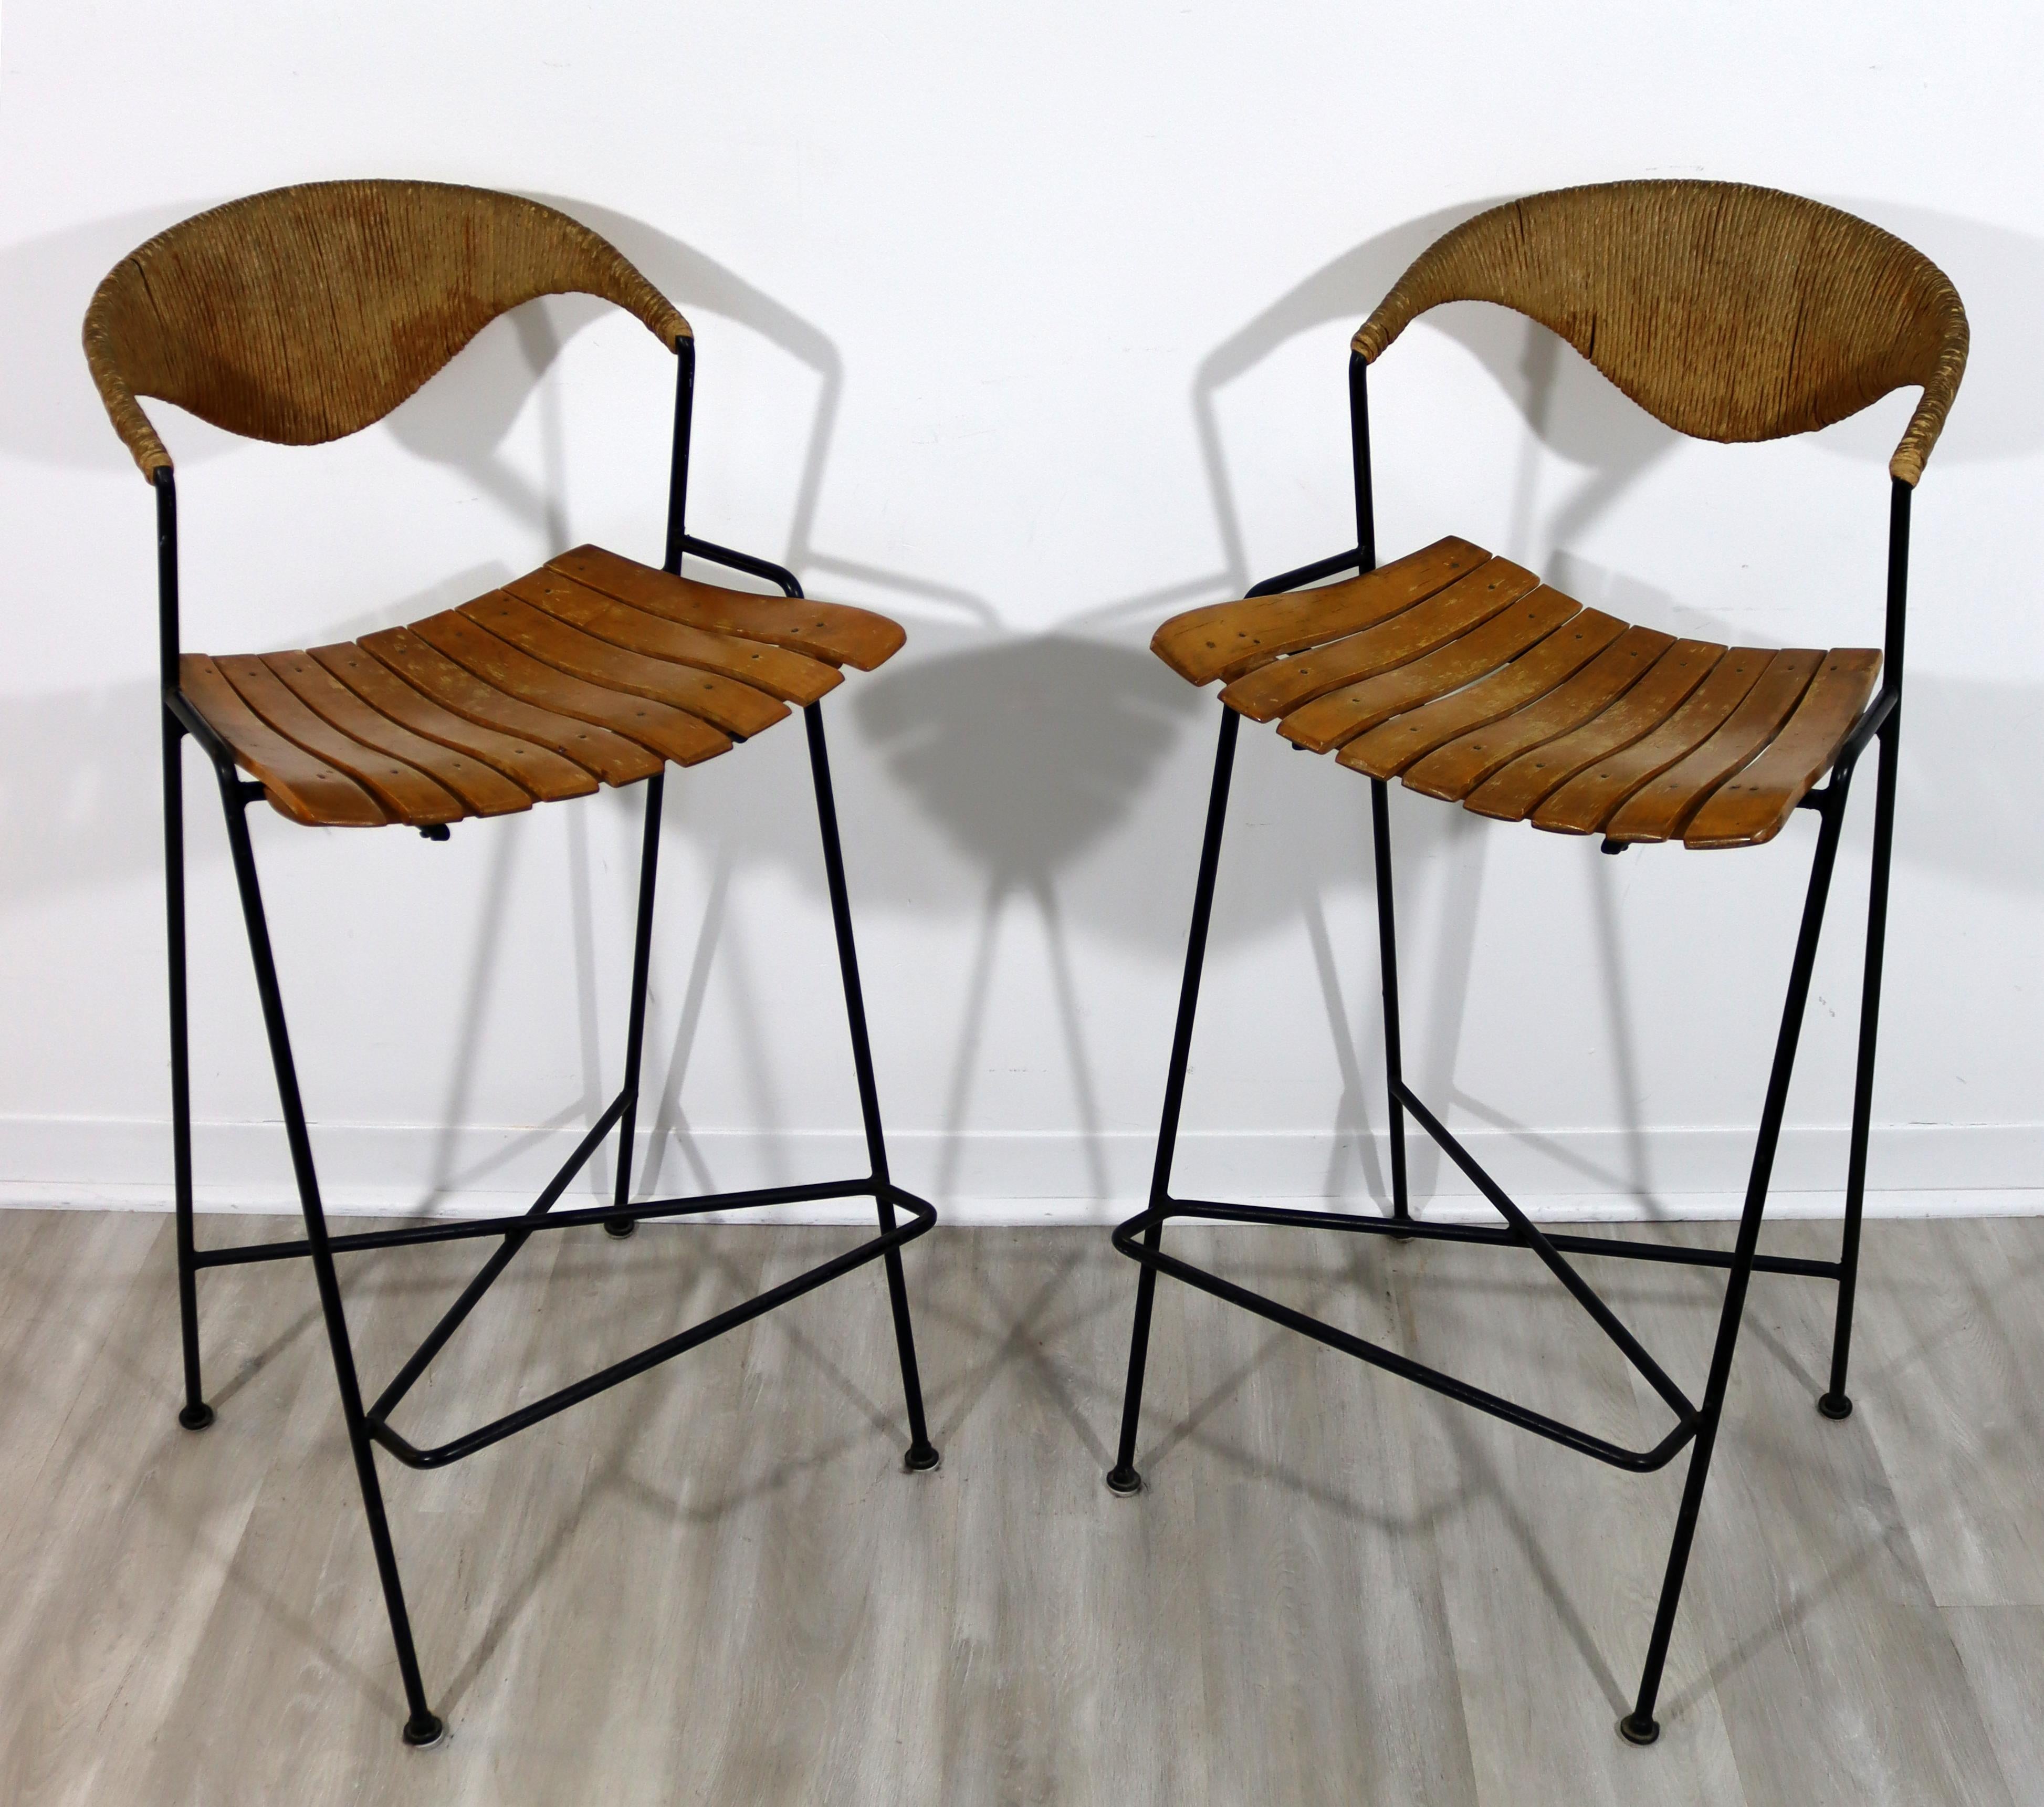 For your consideration is an outstanding pair of Arthur Umanoff, iron bar stools, with wood seats, circa the 1960s. In good vintage condition. The dimensions are 17